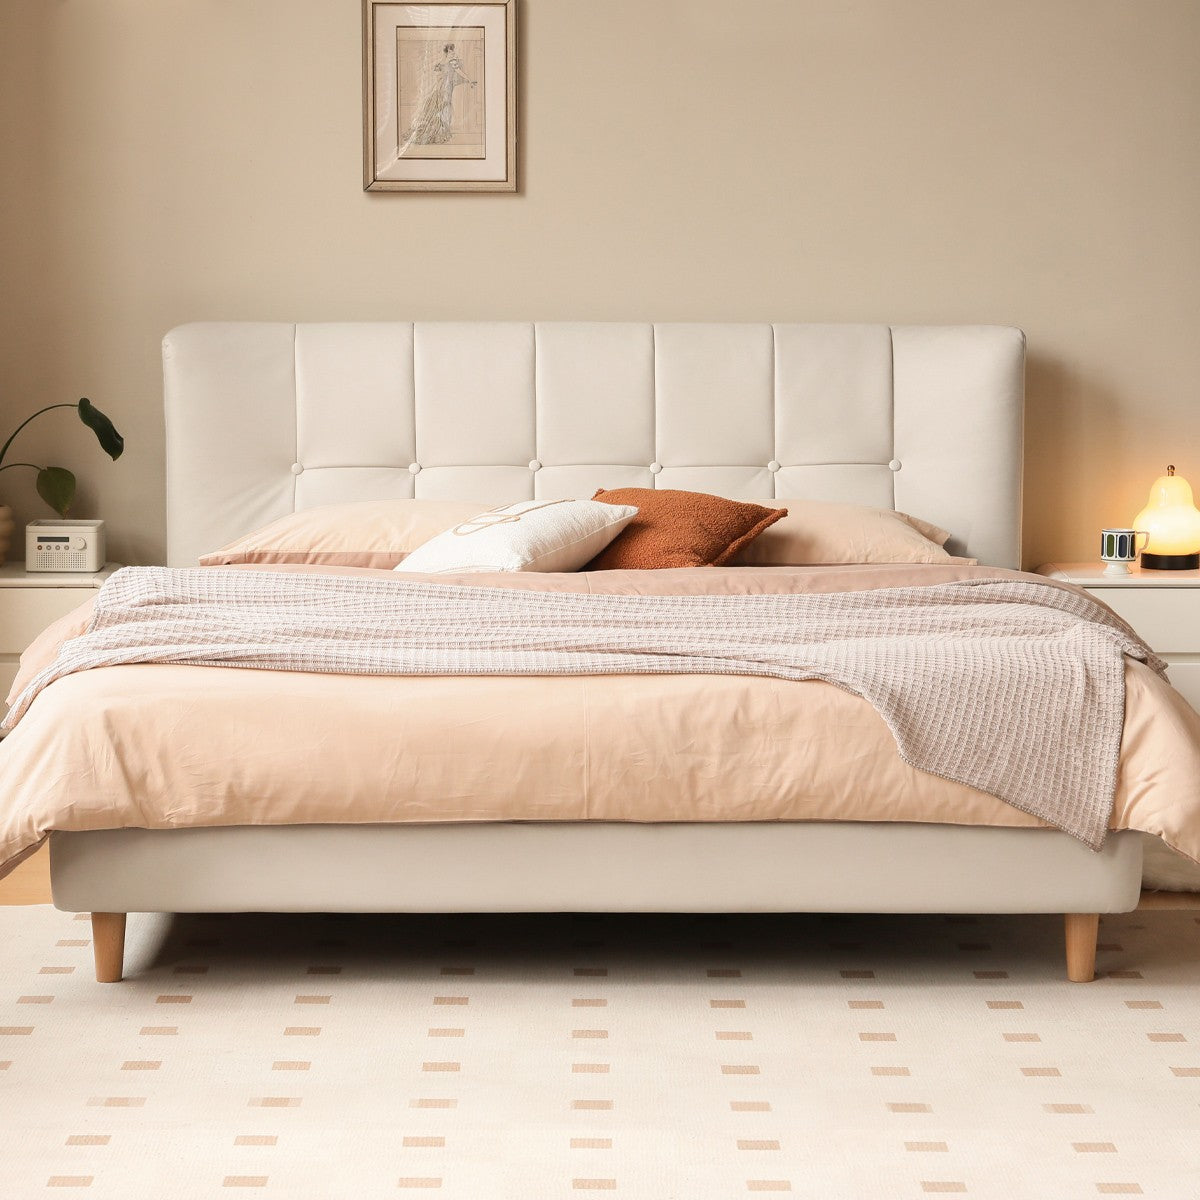 Technology cloth white cream style edge bed